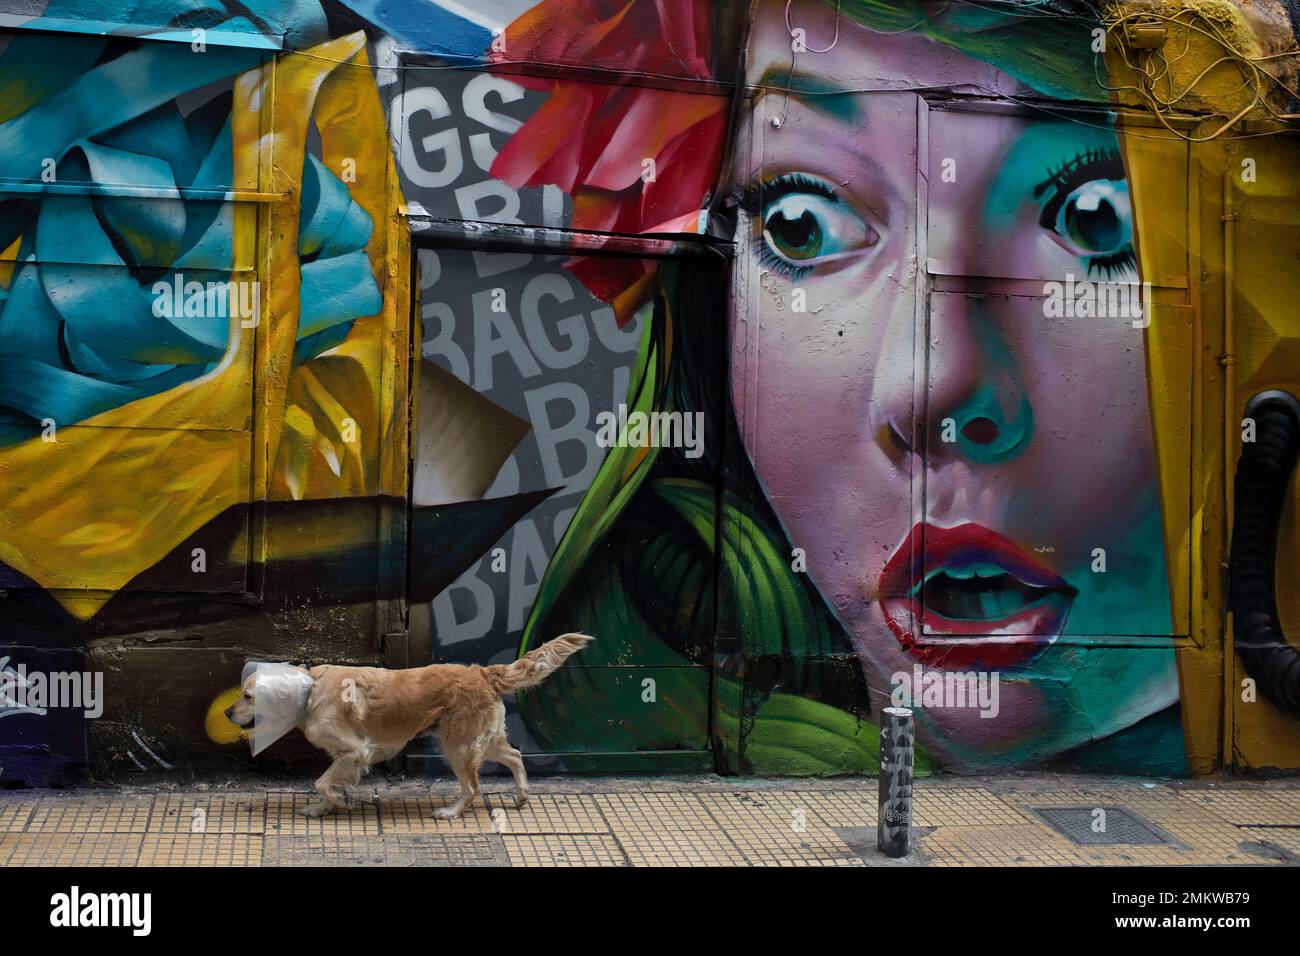 A dog walks past a mural by street artist Alex Martinez outside a shop in the Psiri area of central Athens, on Thursday, Jan. 25, 2018. (AP Photo/Petros Giannakouris) Stock Photo